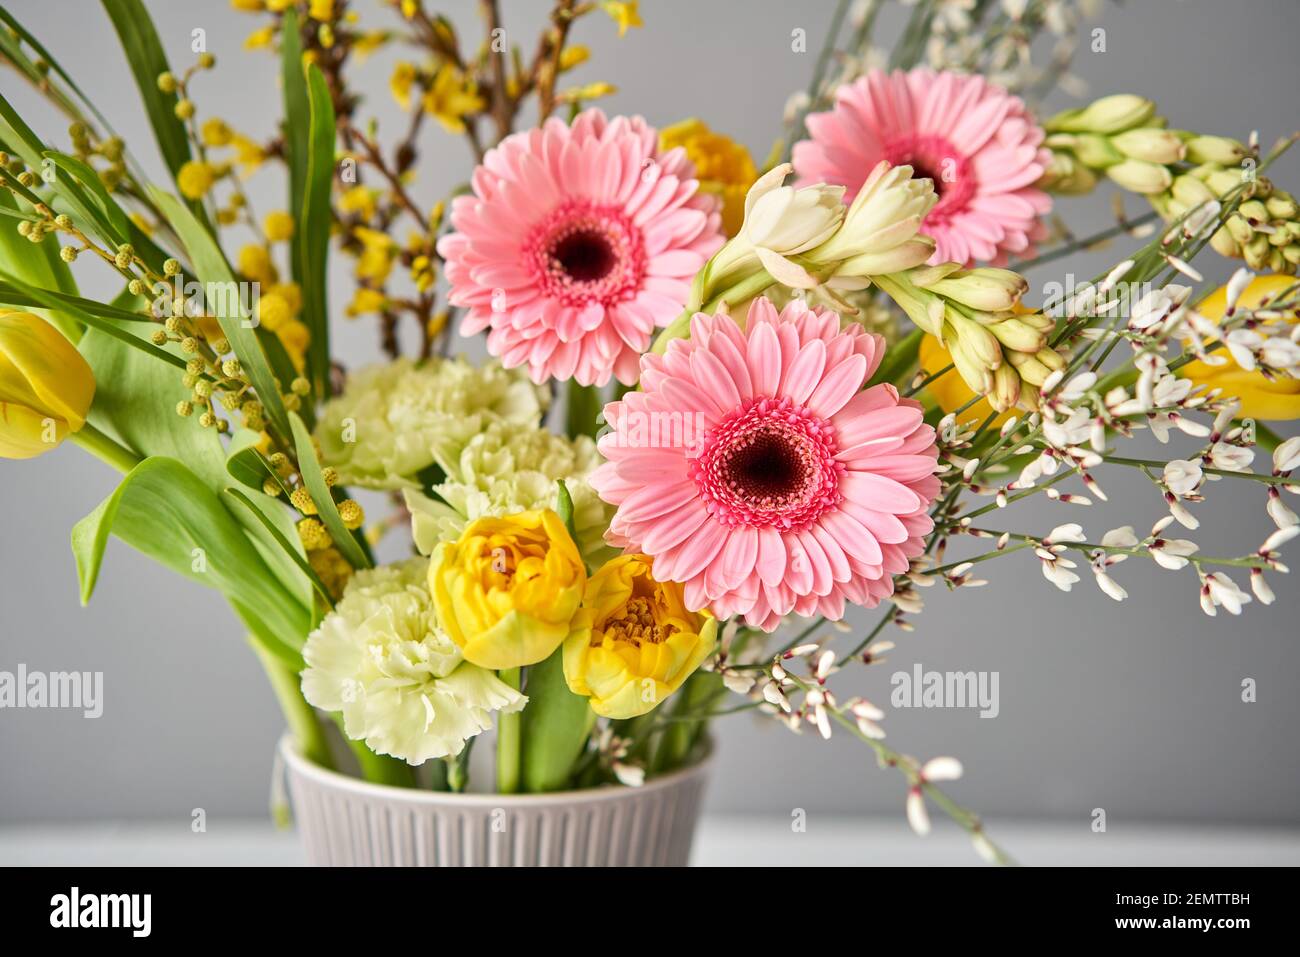 Finished flower arrangement in kenzan a vase for home. Flowers bunch, set for interior. Fresh cut flowers for decoration home. European floral shop Stock Photo